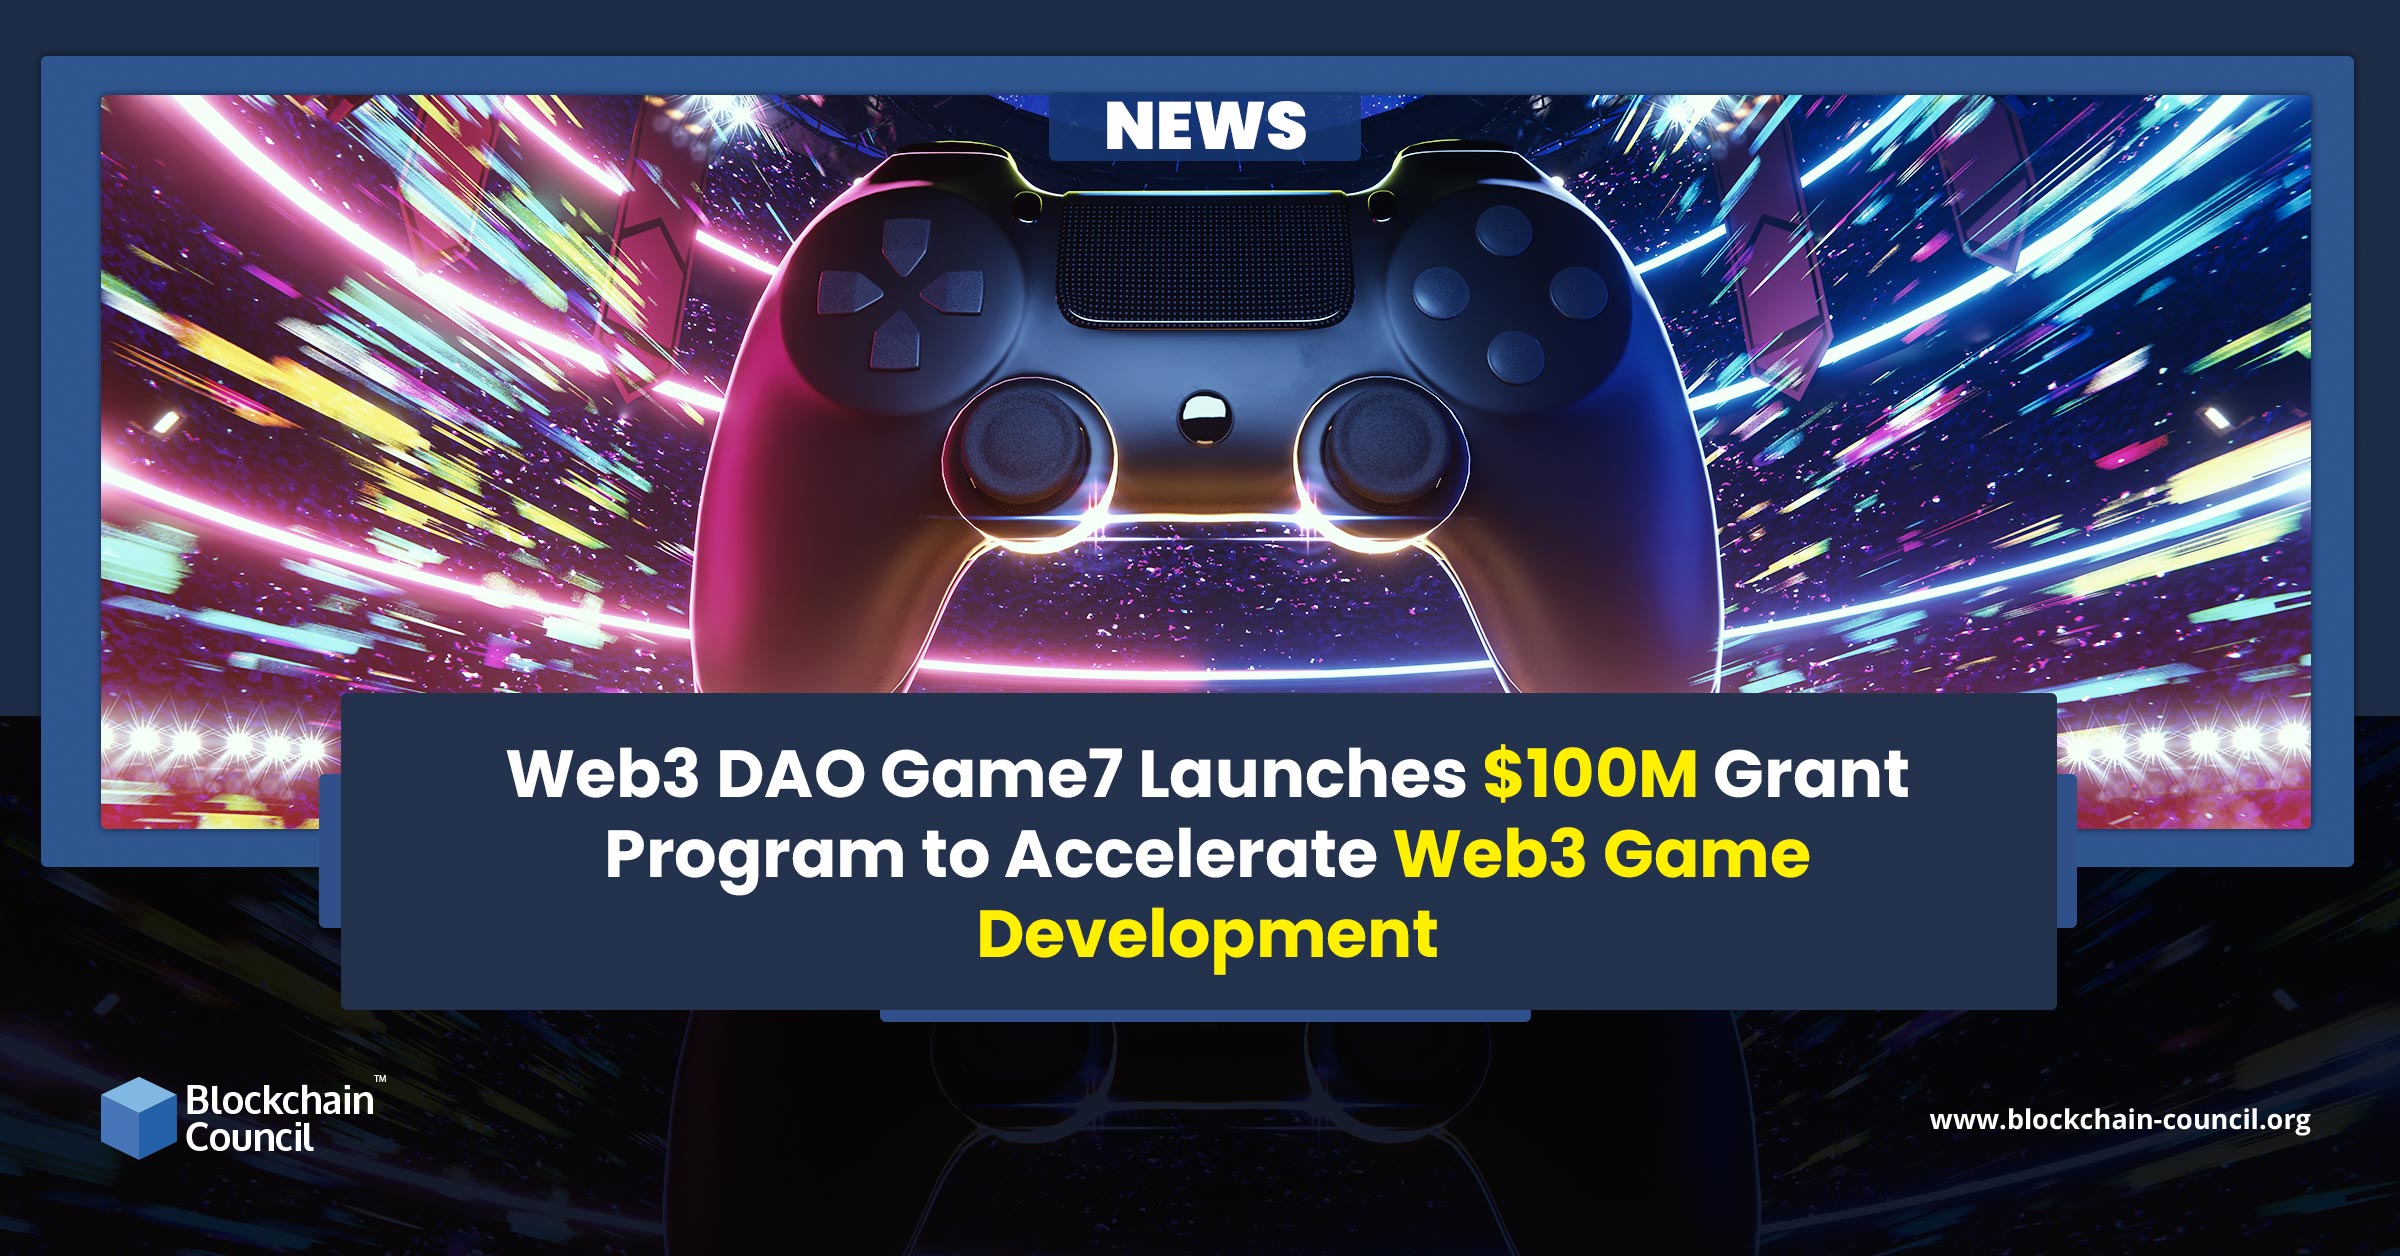 Web3 DAO Game7 Launches $100M Grant Program to Accelerate Web3 Game Development